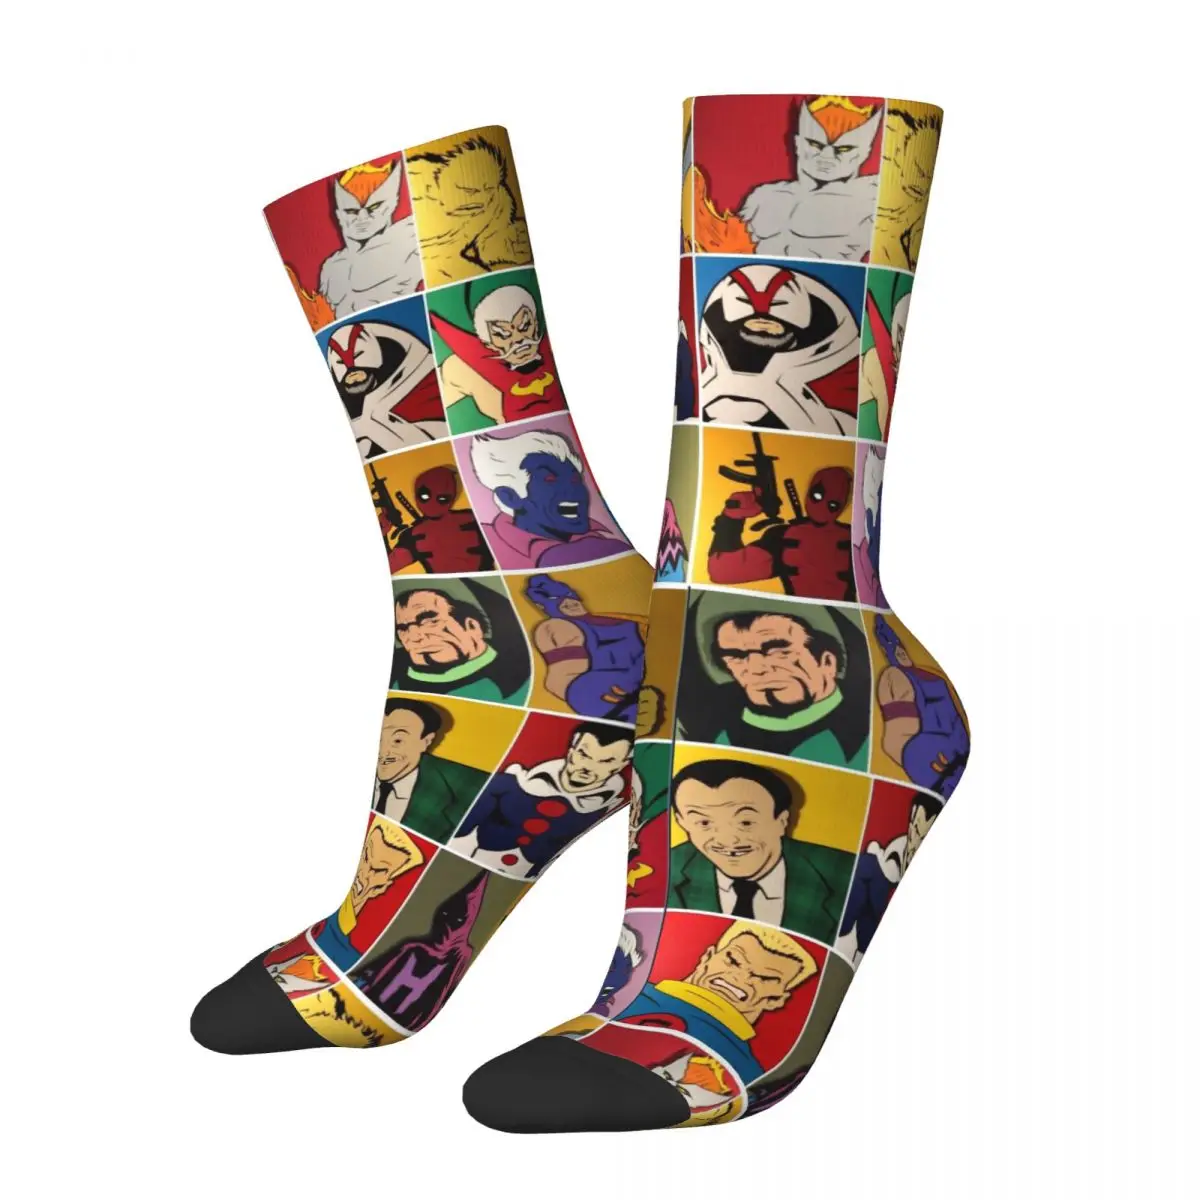 Friends He-Man The Master Of The Universe cosy Unisex Socks Cycling Interesting Four Seasons Socks backpack rain cover fashion friends print outdoor sport cycling safety rain cover 20 70l camping hiking waterproof bag cover new